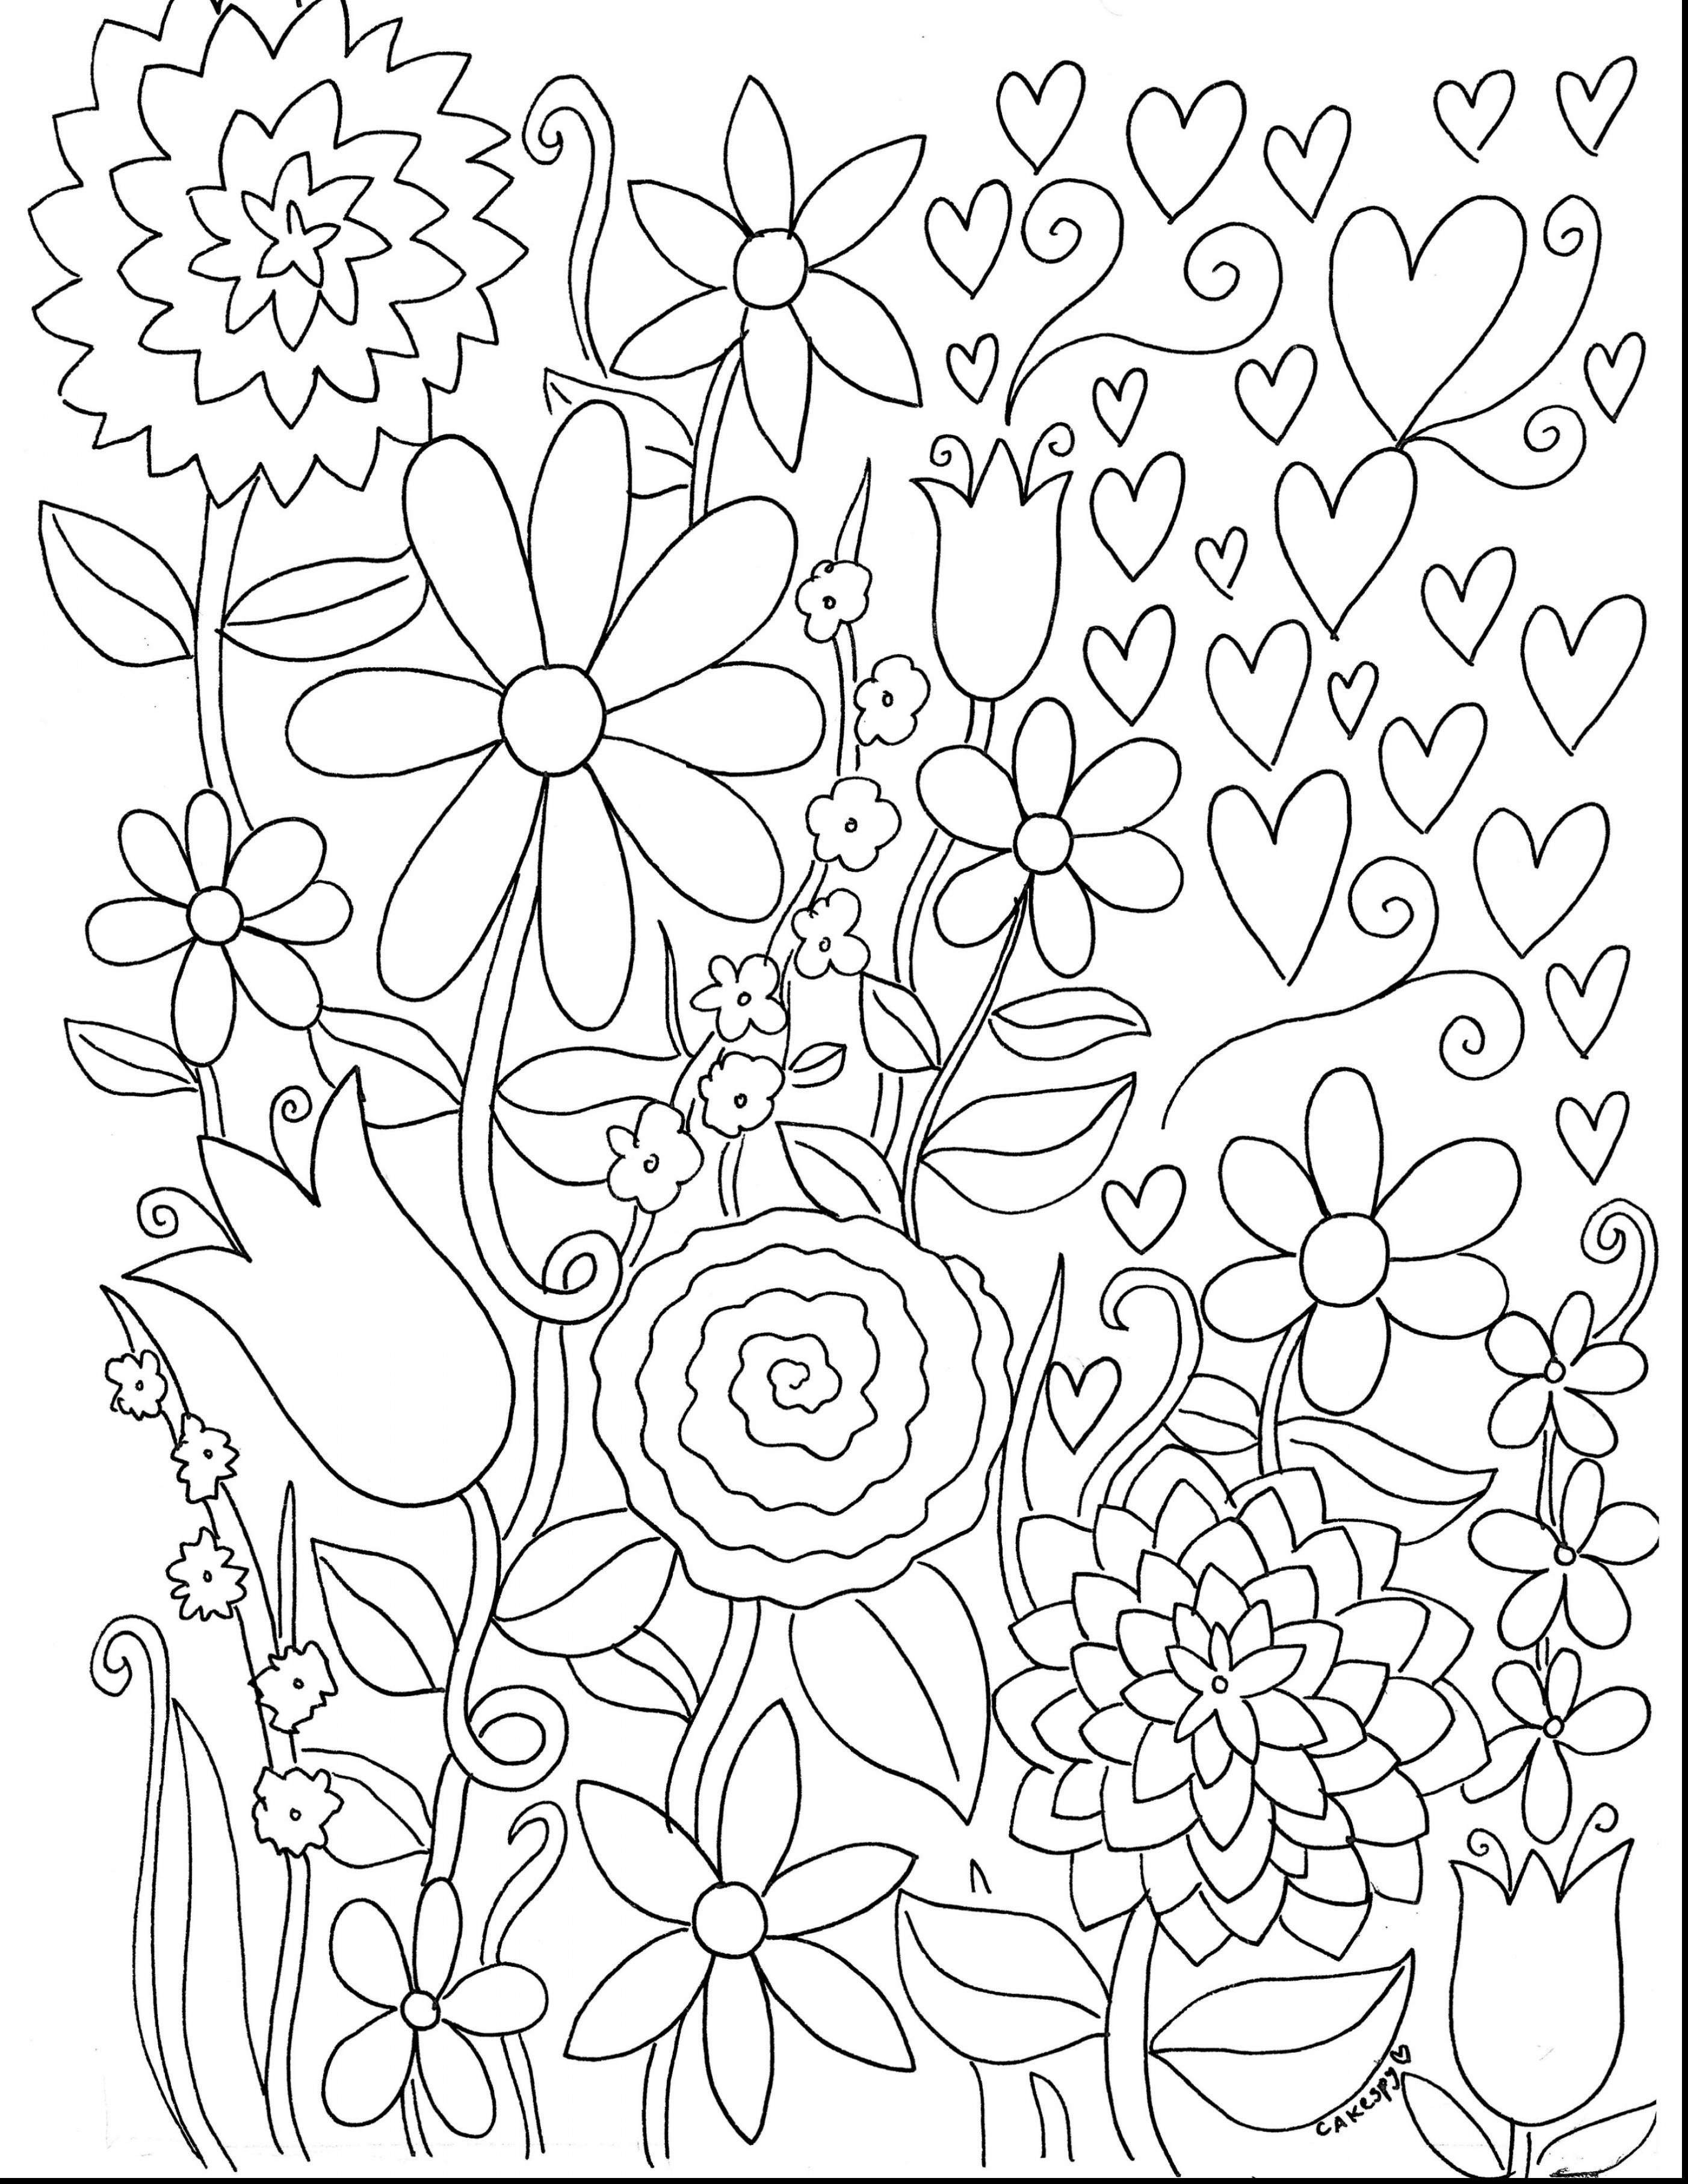 Make Your Own Coloring Pages For Free At GetColorings Free Printable Colorings Pages To 